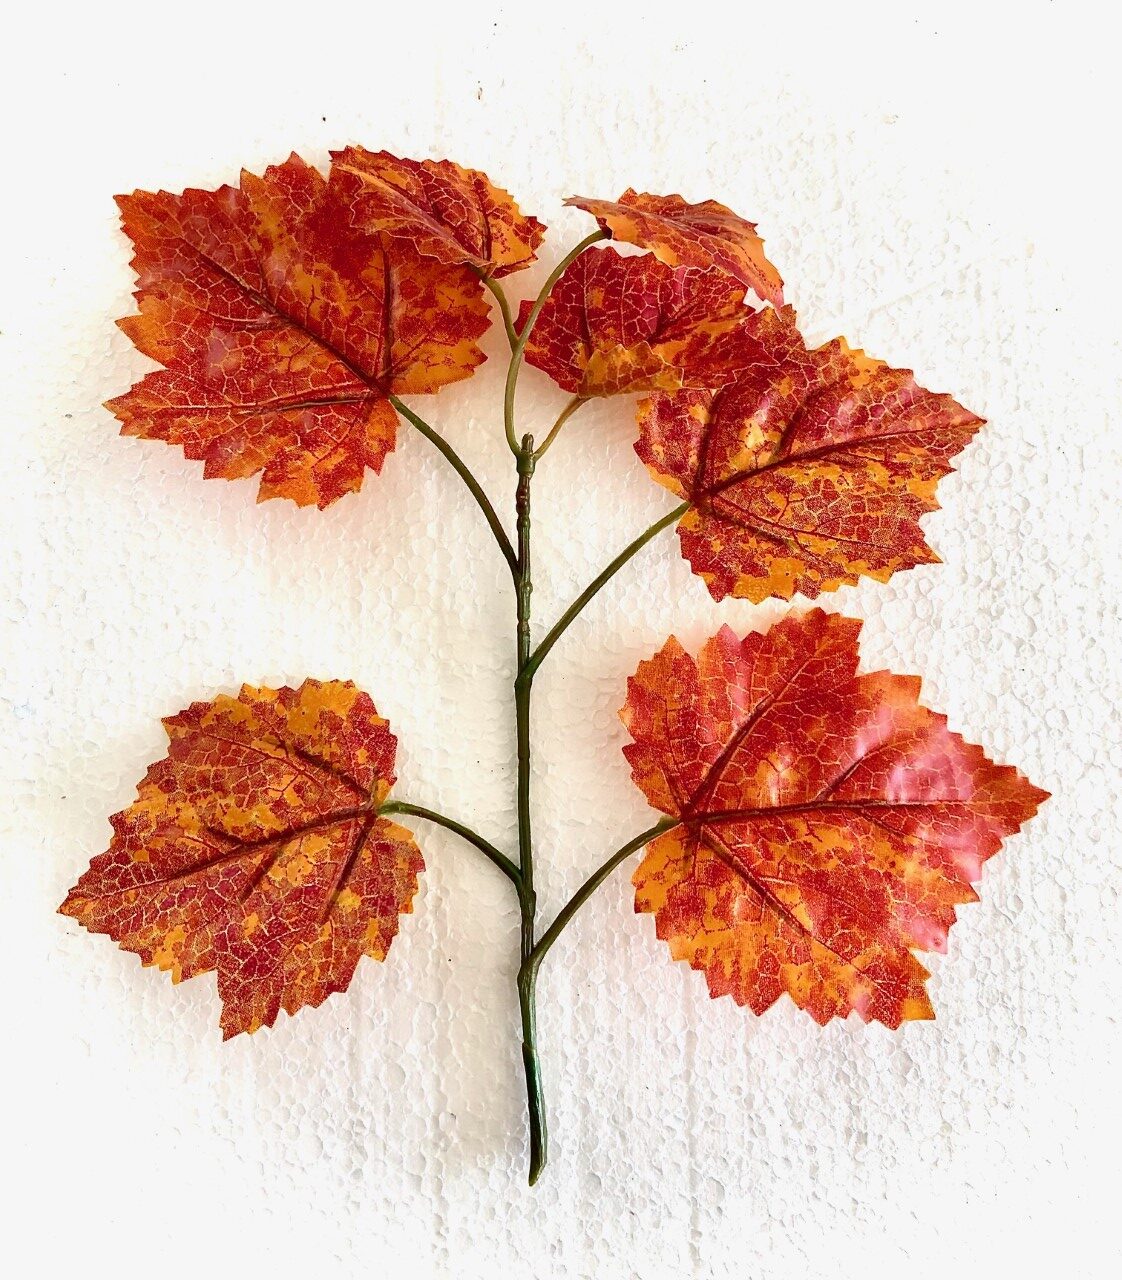 Fake 'Autumnal Red Coloured' Leaves (20-25cm)